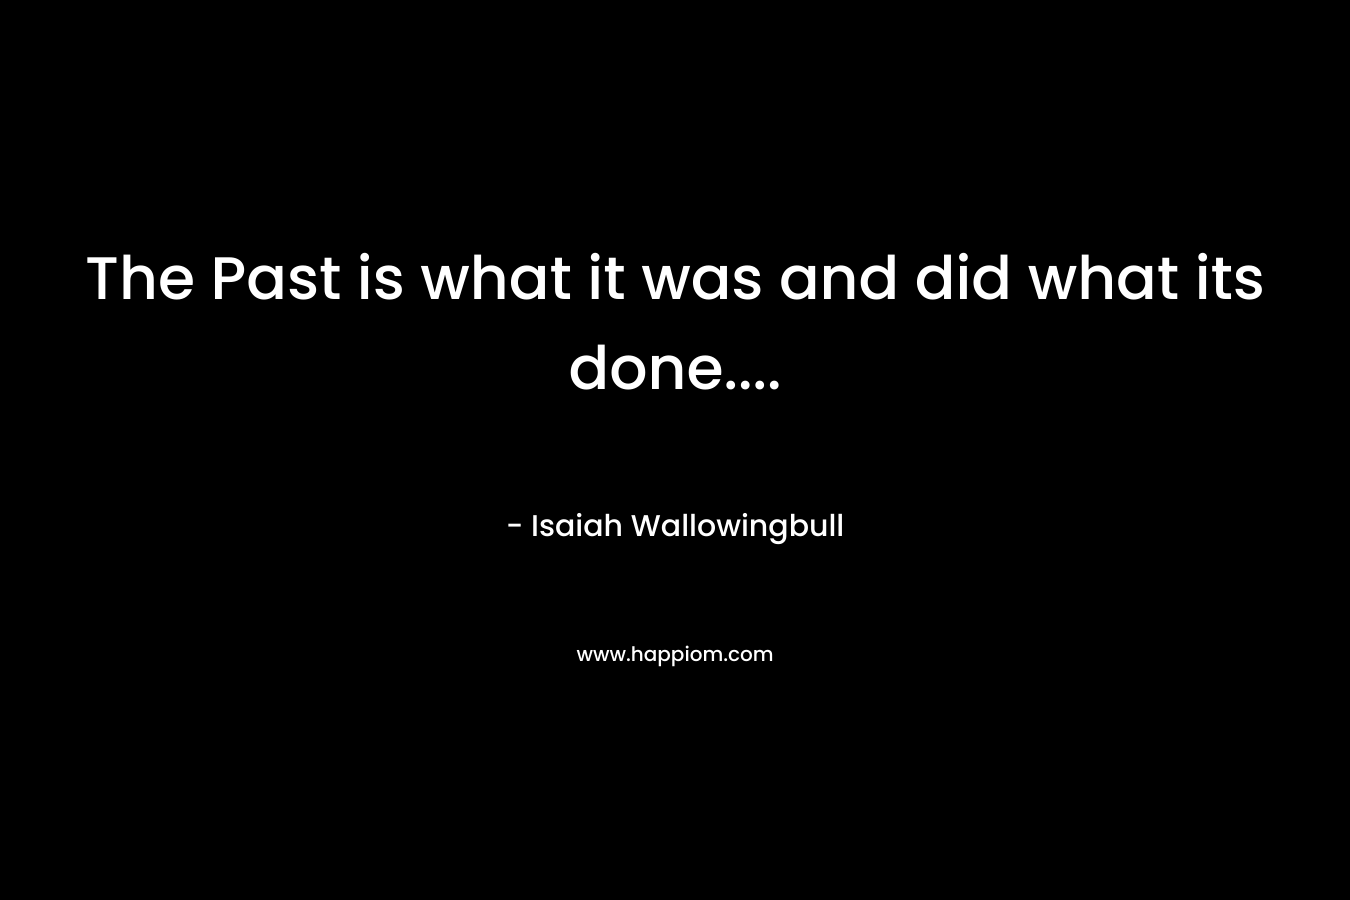 The Past is what it was and did what its done....